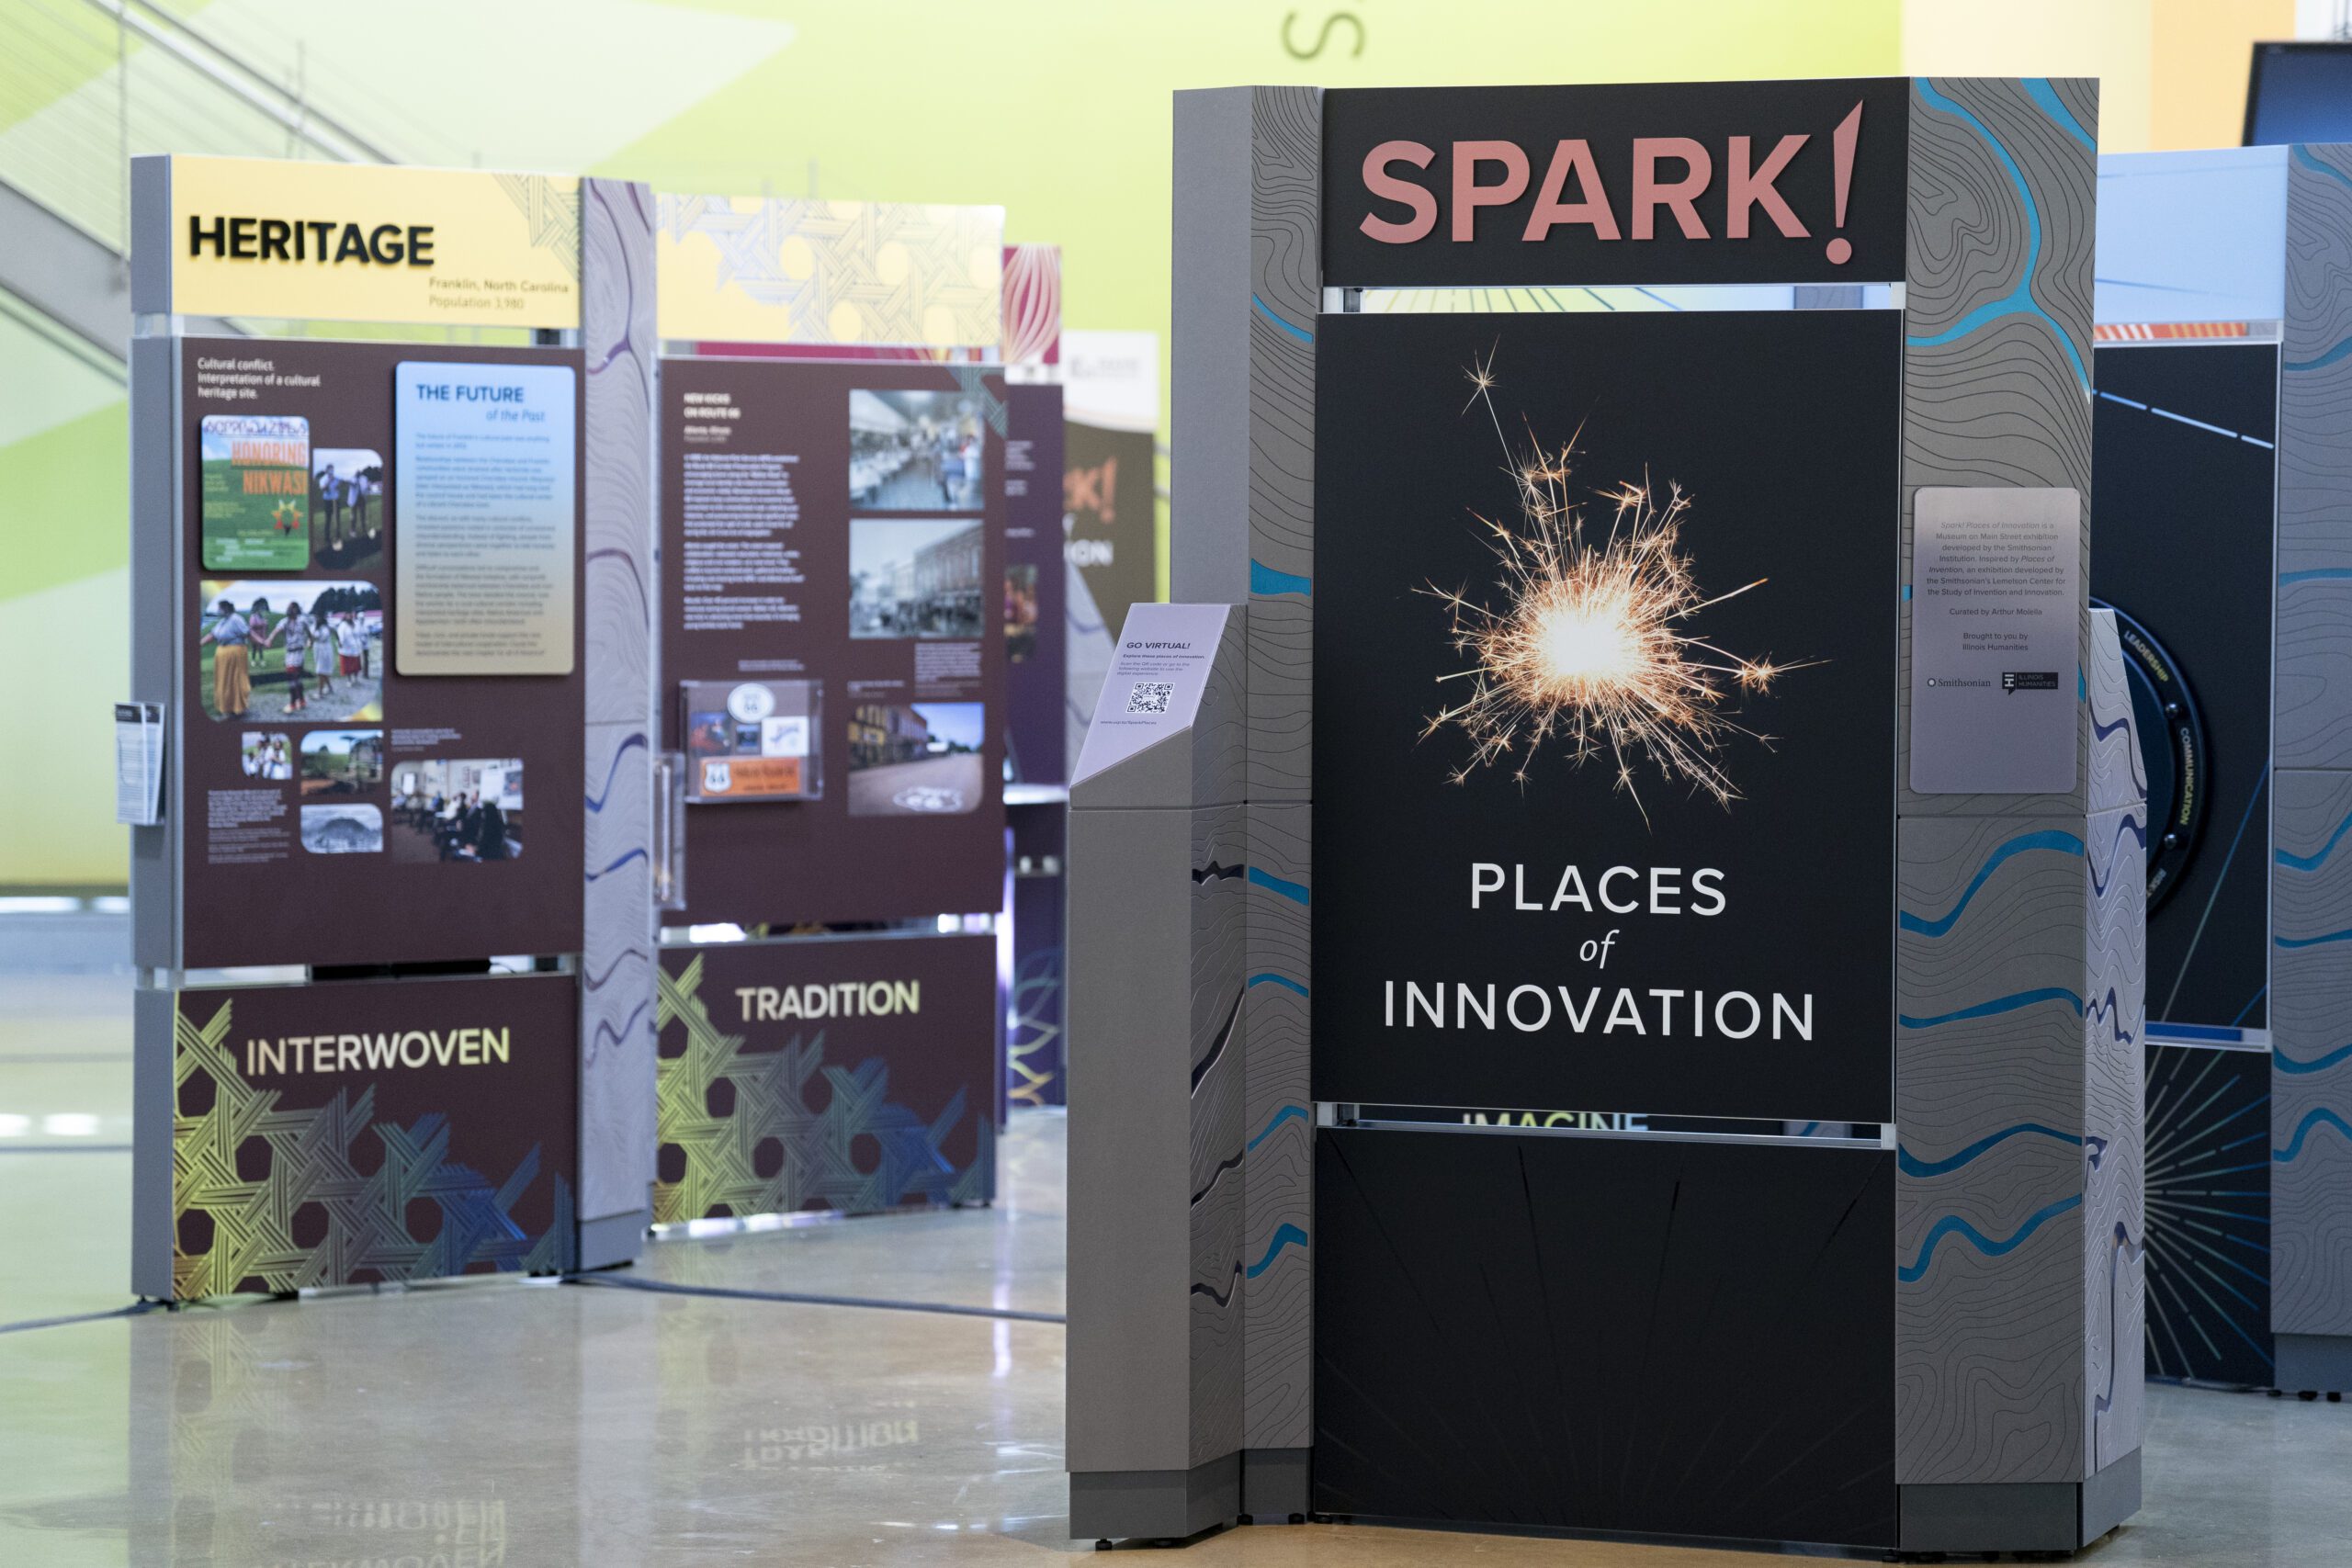 Photograph of SPARK! Smithsonian exhibit, which features pictures, unreadable text, and key words like INTERWOVEN and TRADITION